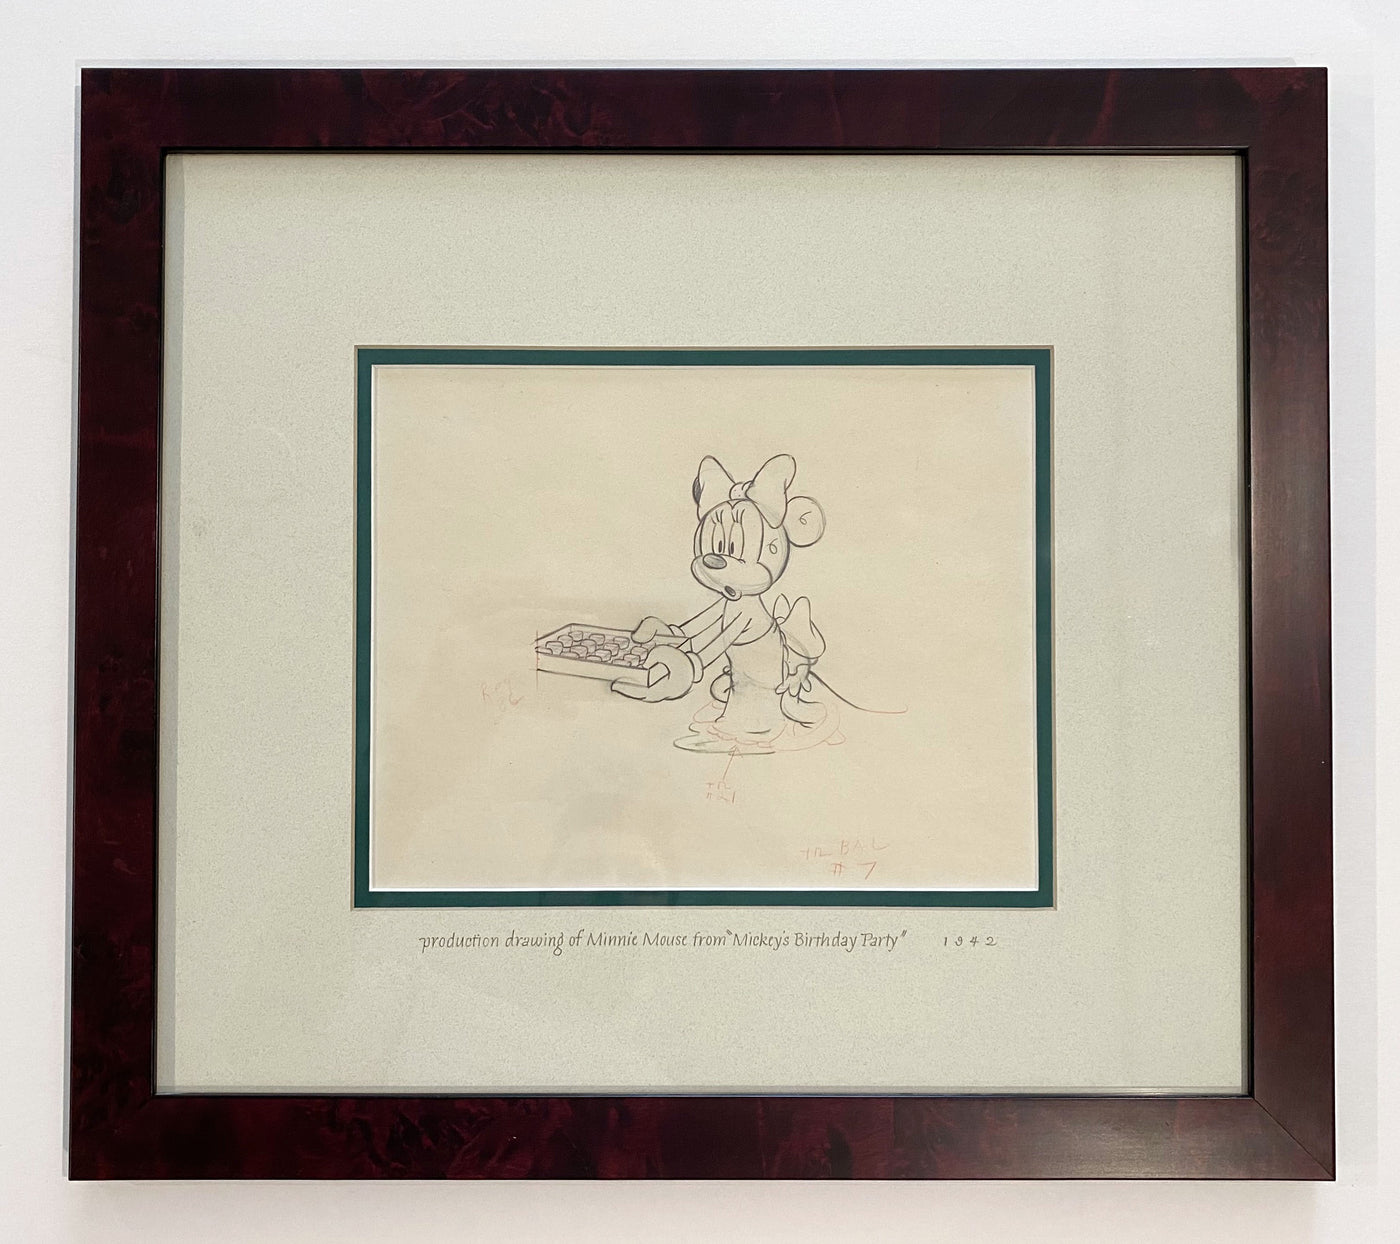 Original Walt Disney Production Drawing of Minnie Mouse from Mickey's Birthday Party (1942)